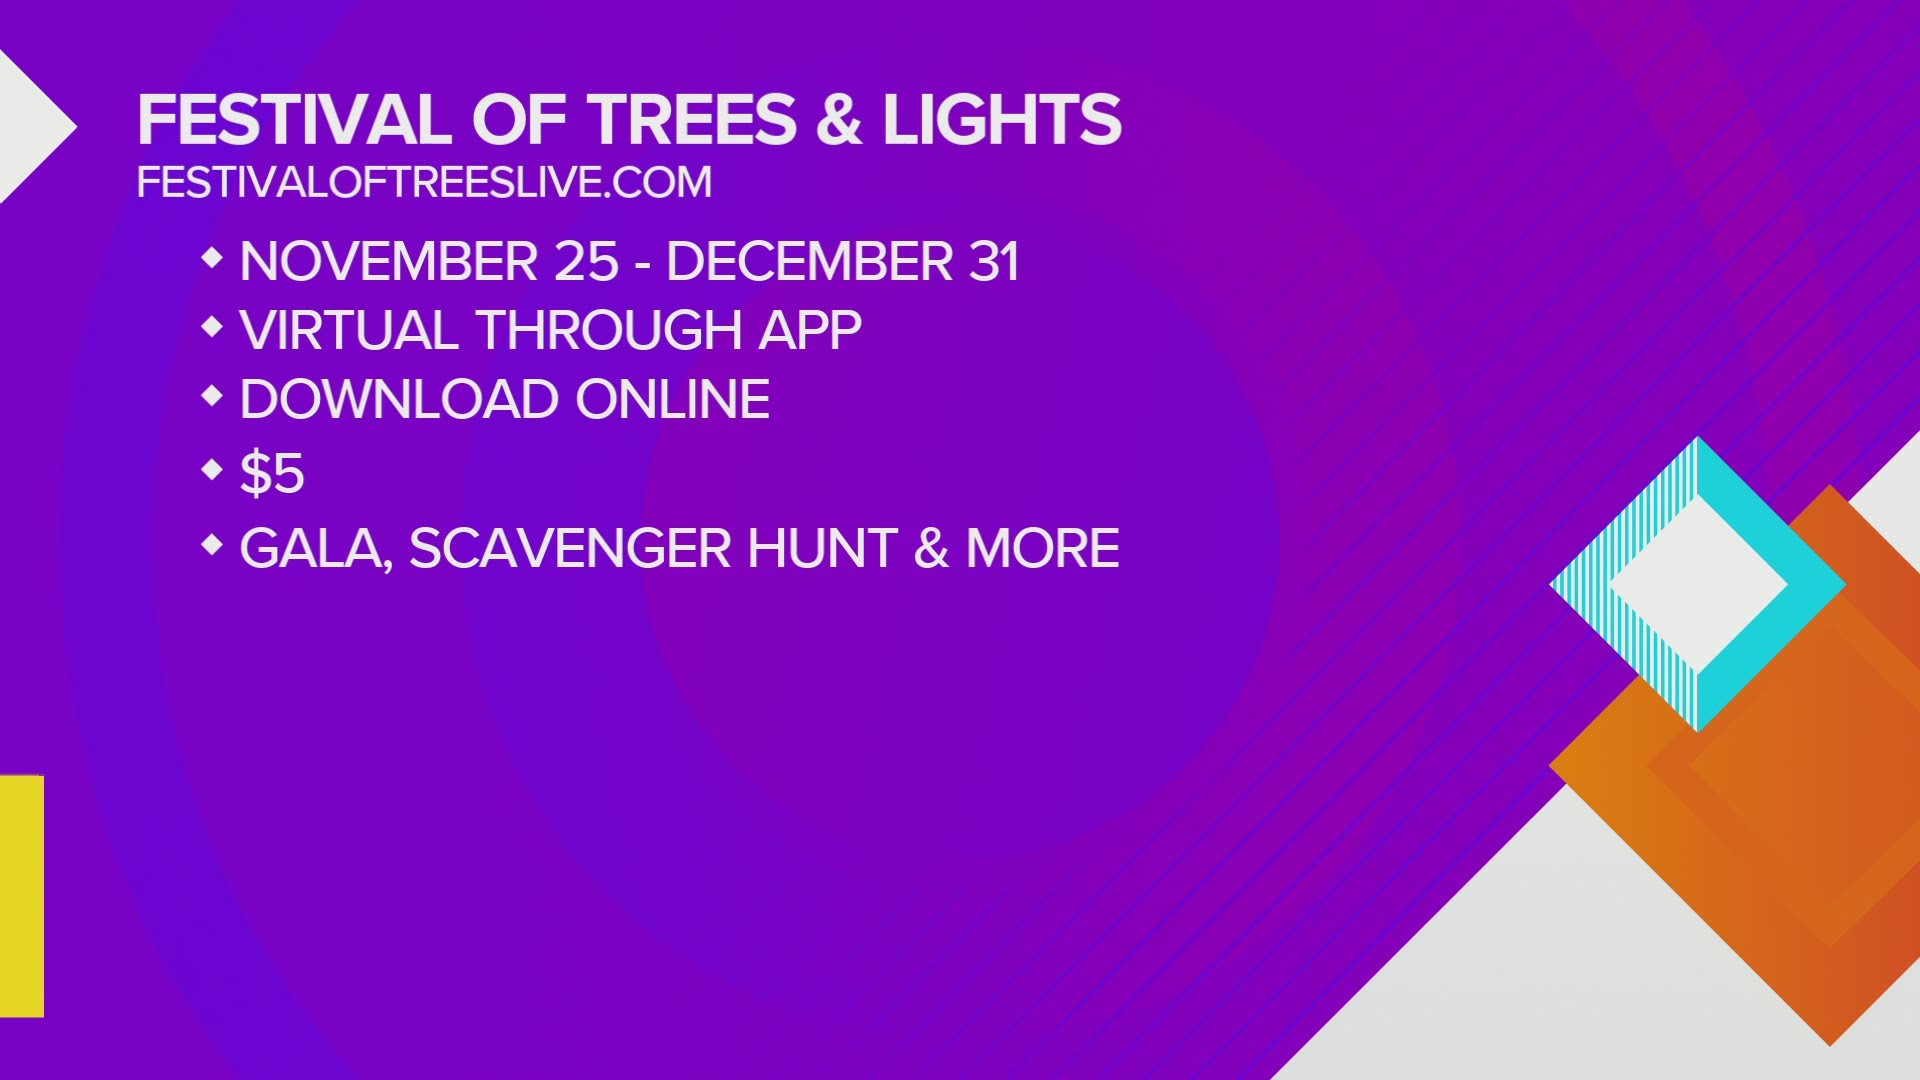 The Festival of Trees and Lights is virtual this year and run through a special app